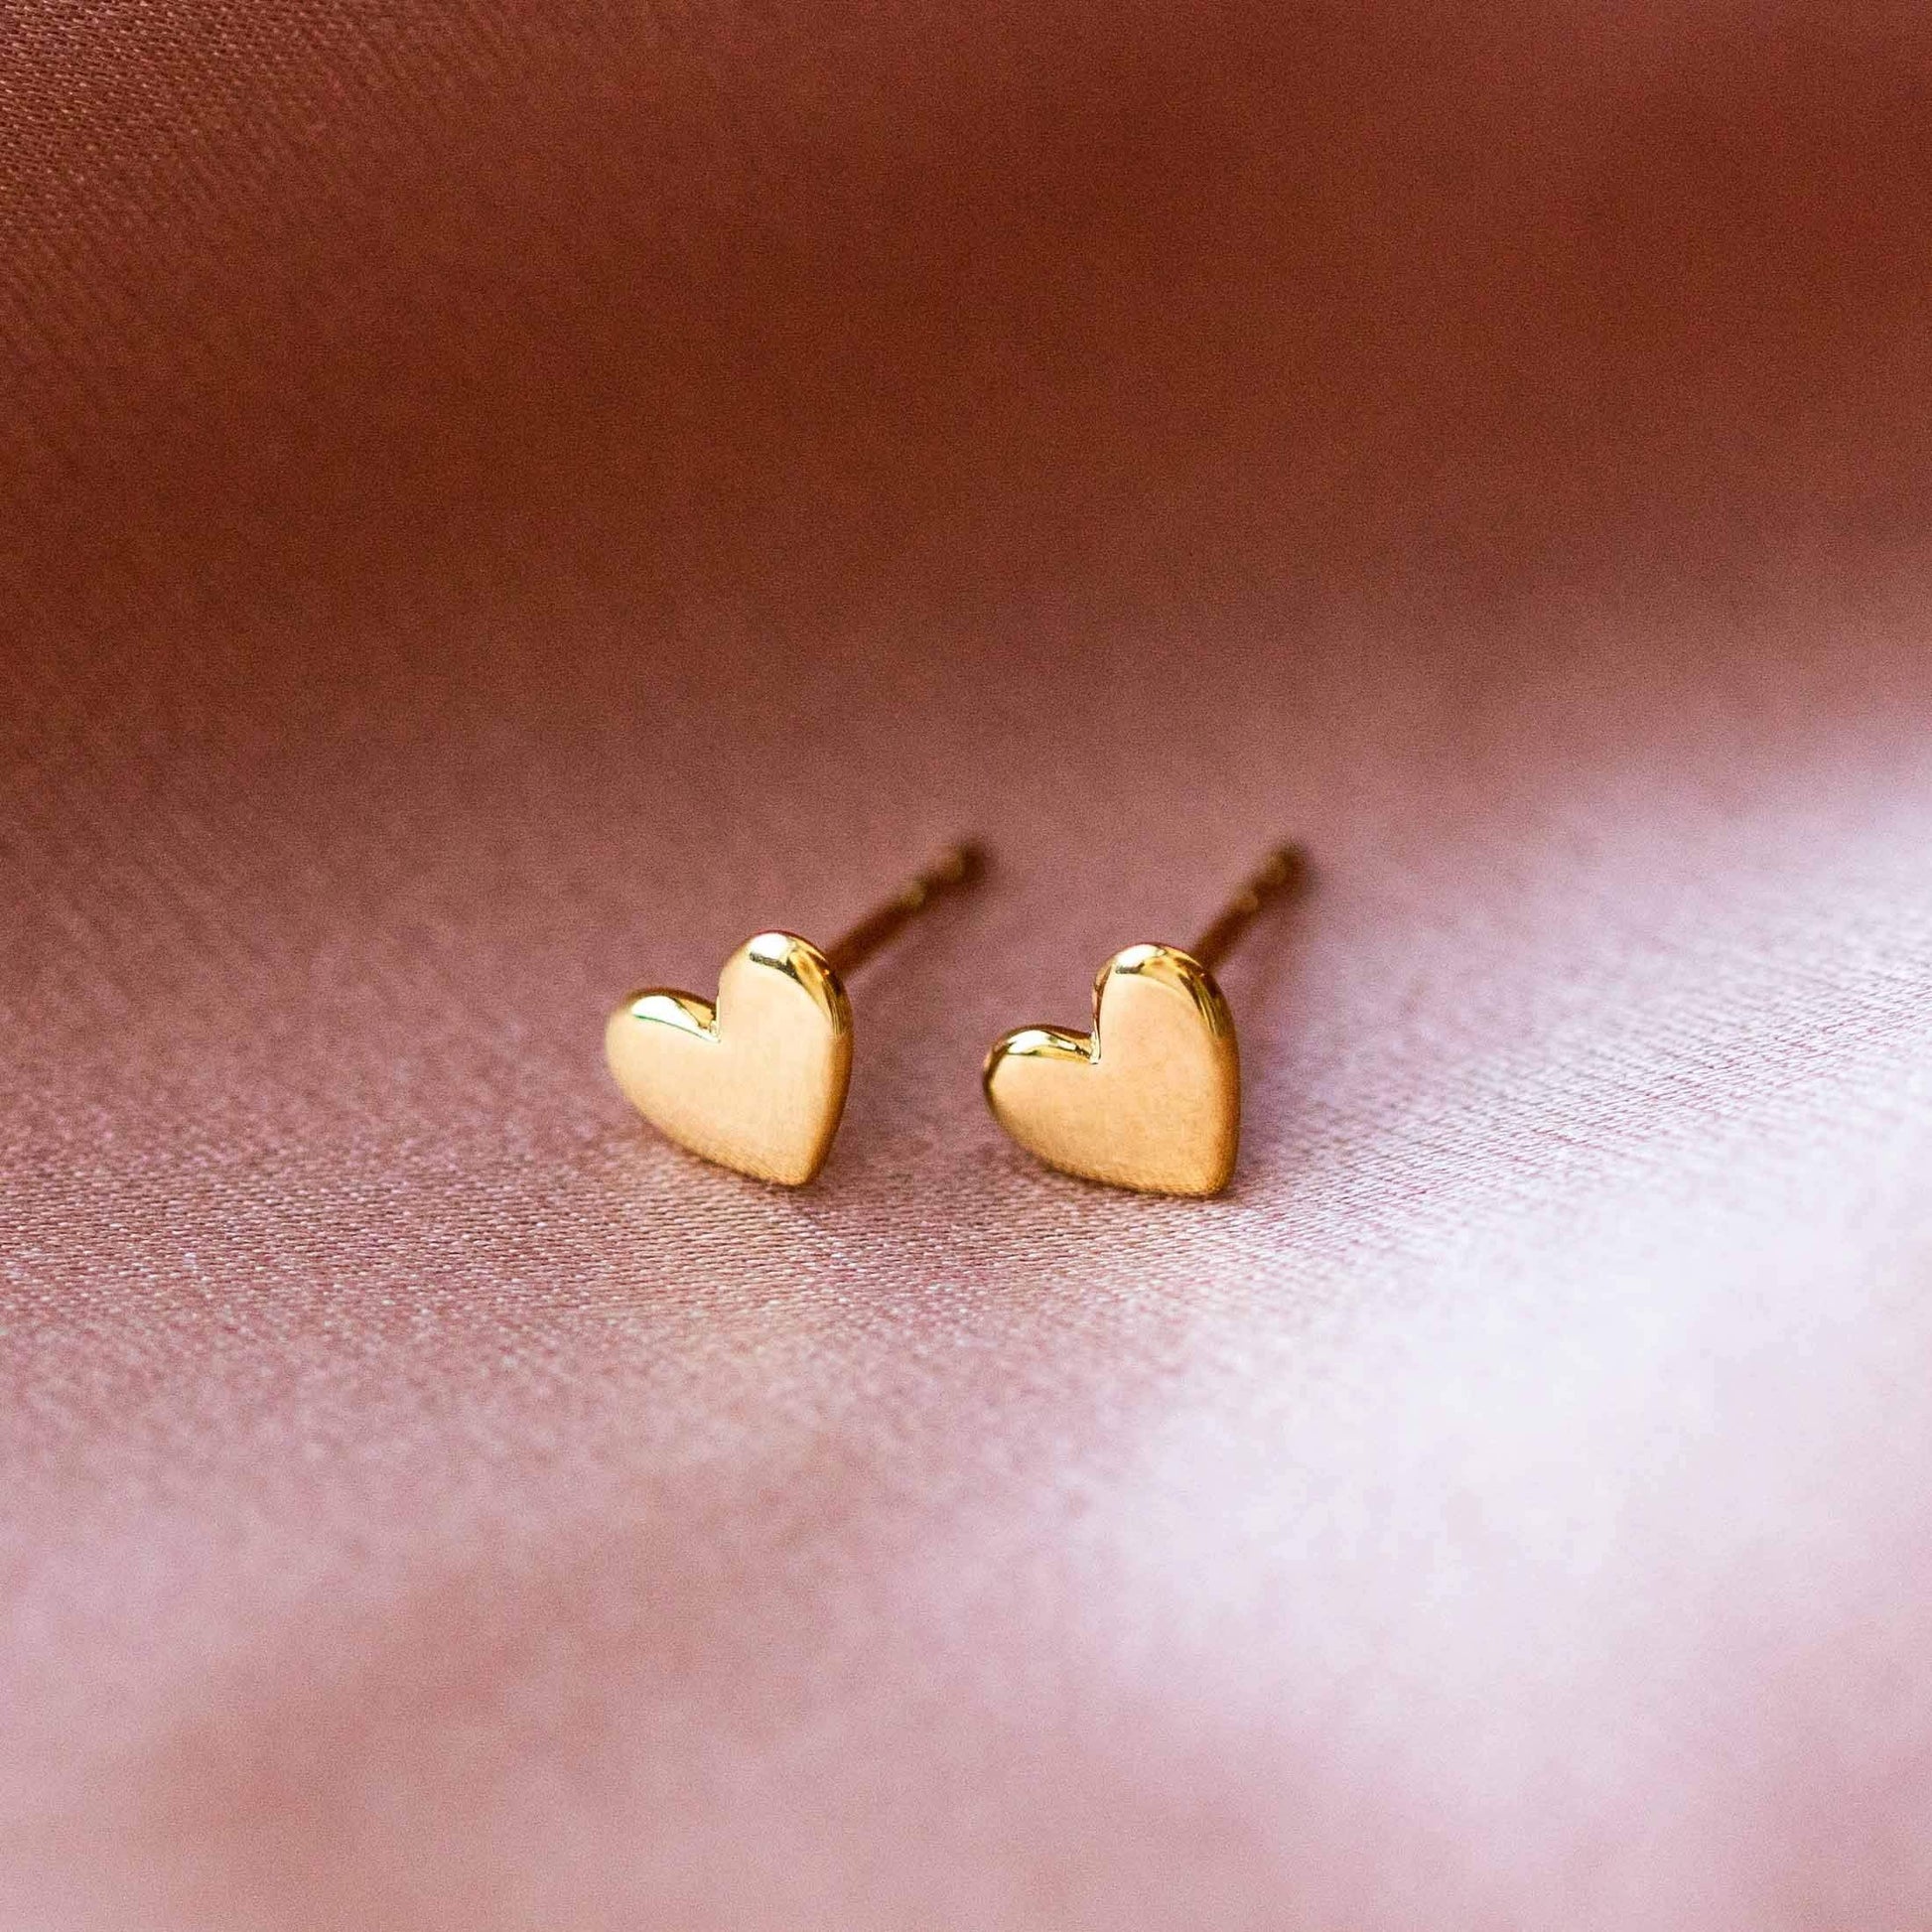 Solid Yellow Gold Heart Stud Earrings Family Gold Fine Jewelry